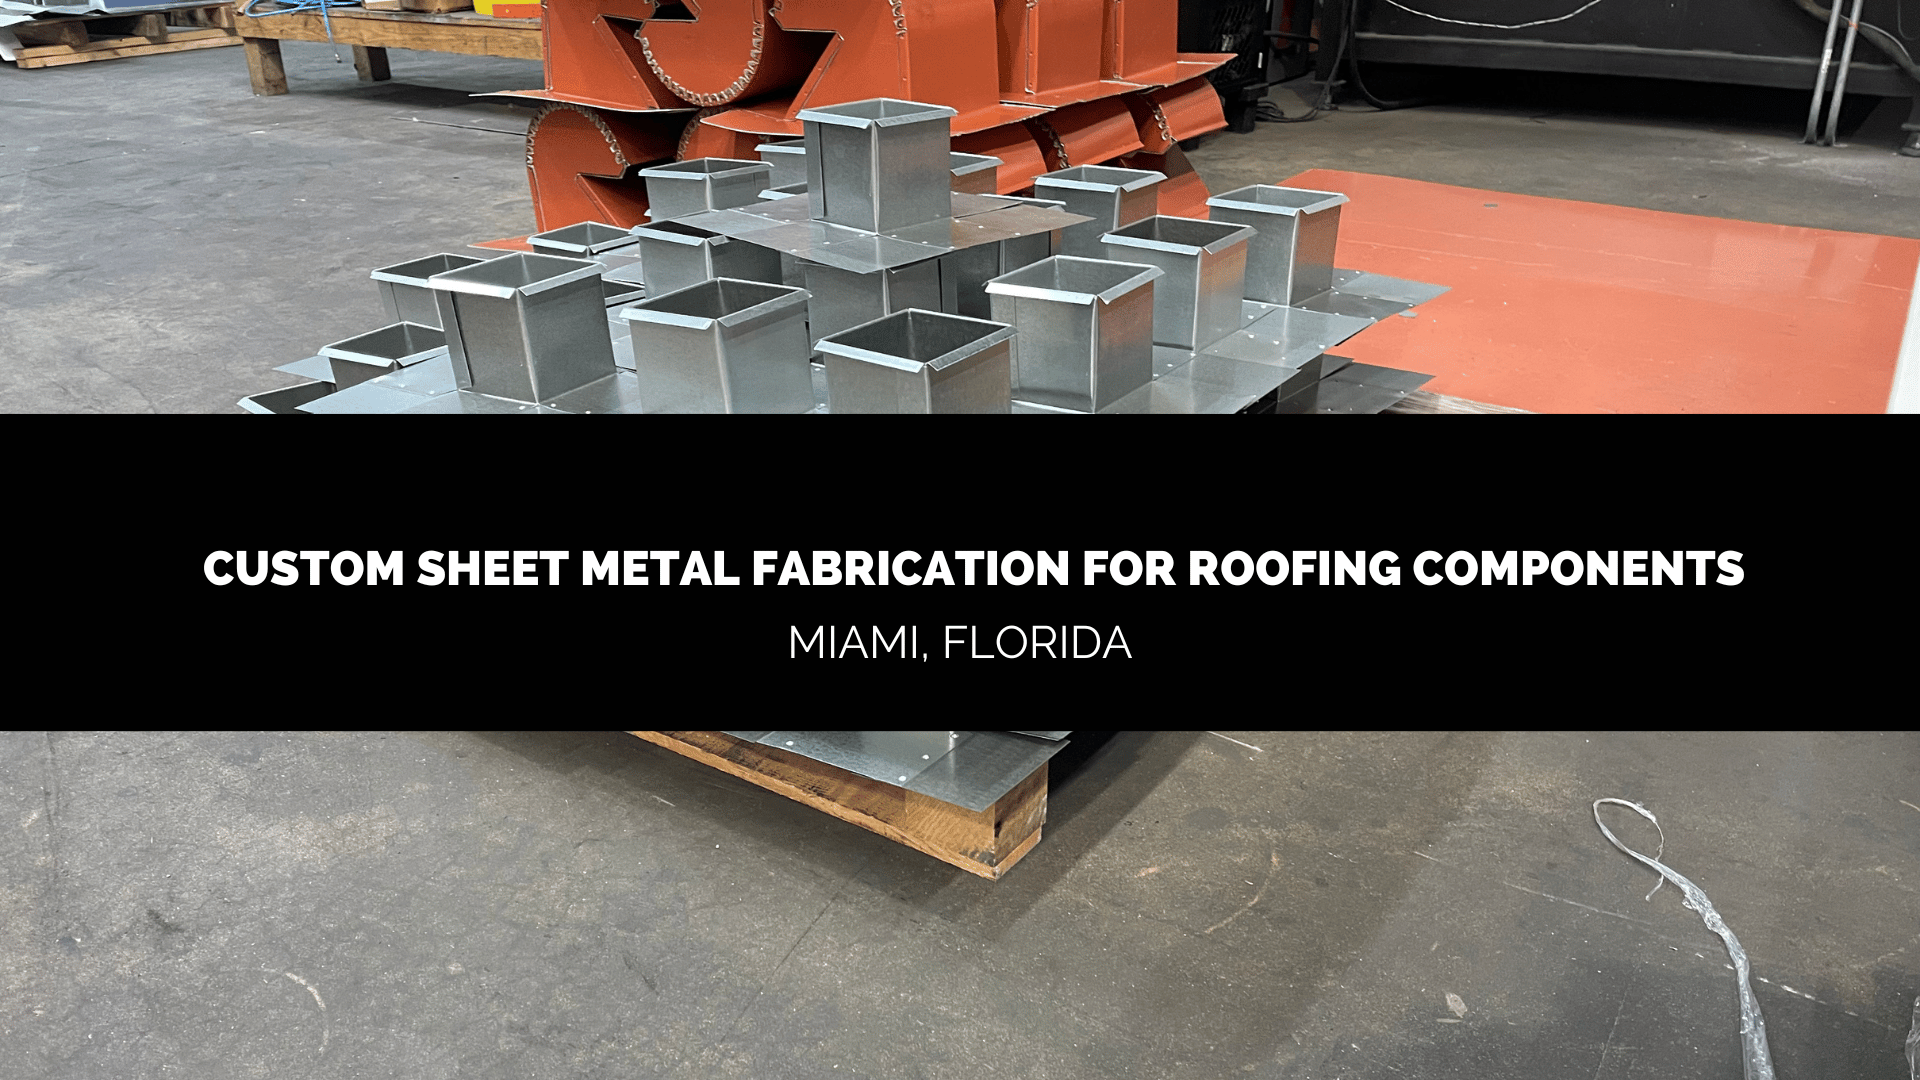 CUSTOM SHEET METAL FABRICATION for ROOFING COMPONENTS MIAMI DADE FLORIDA